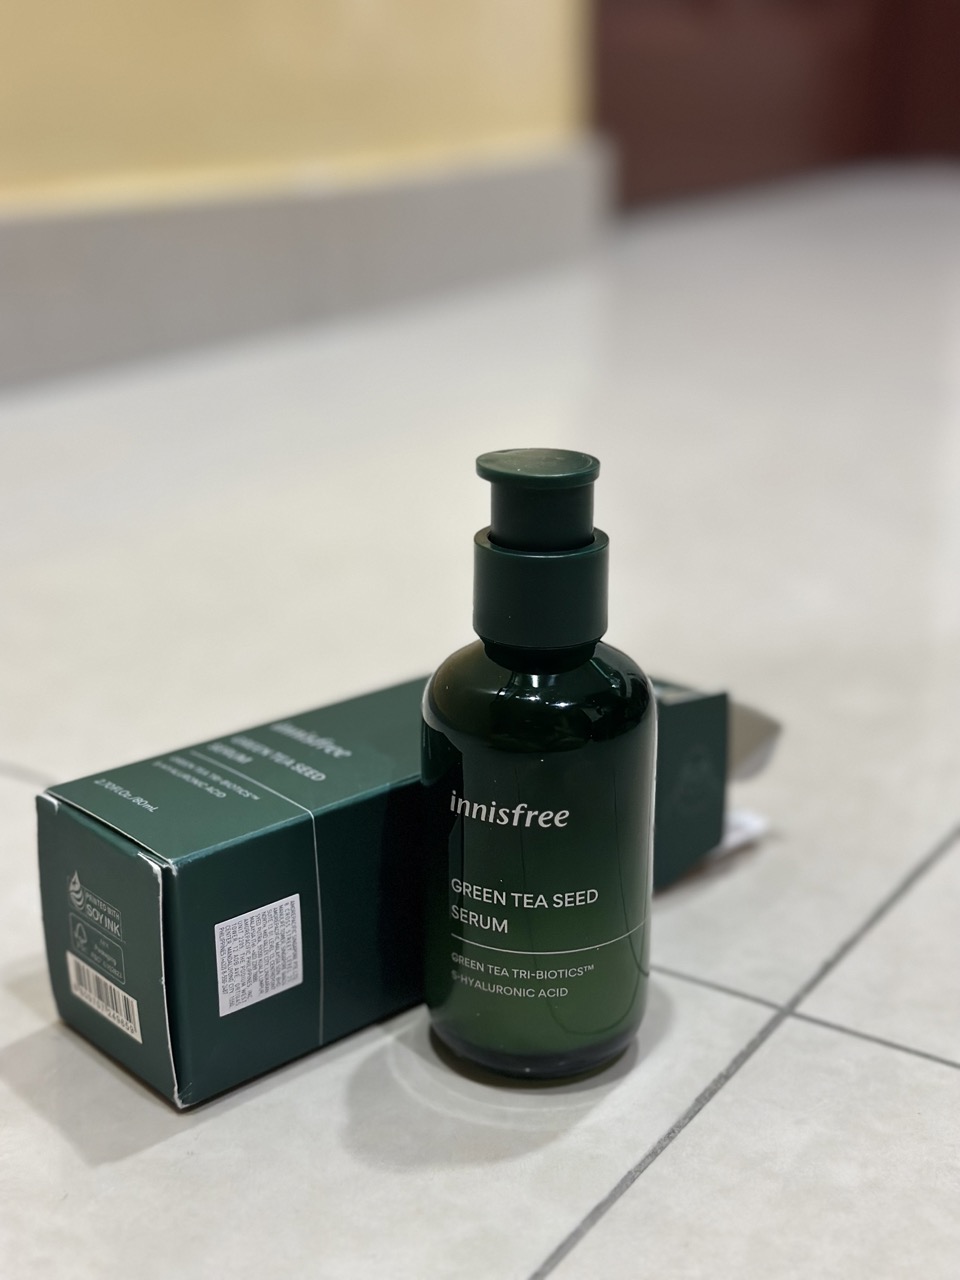 Innisfree launches green tea seed serum with its rebranding. Here's what we think about it | weirdkaya